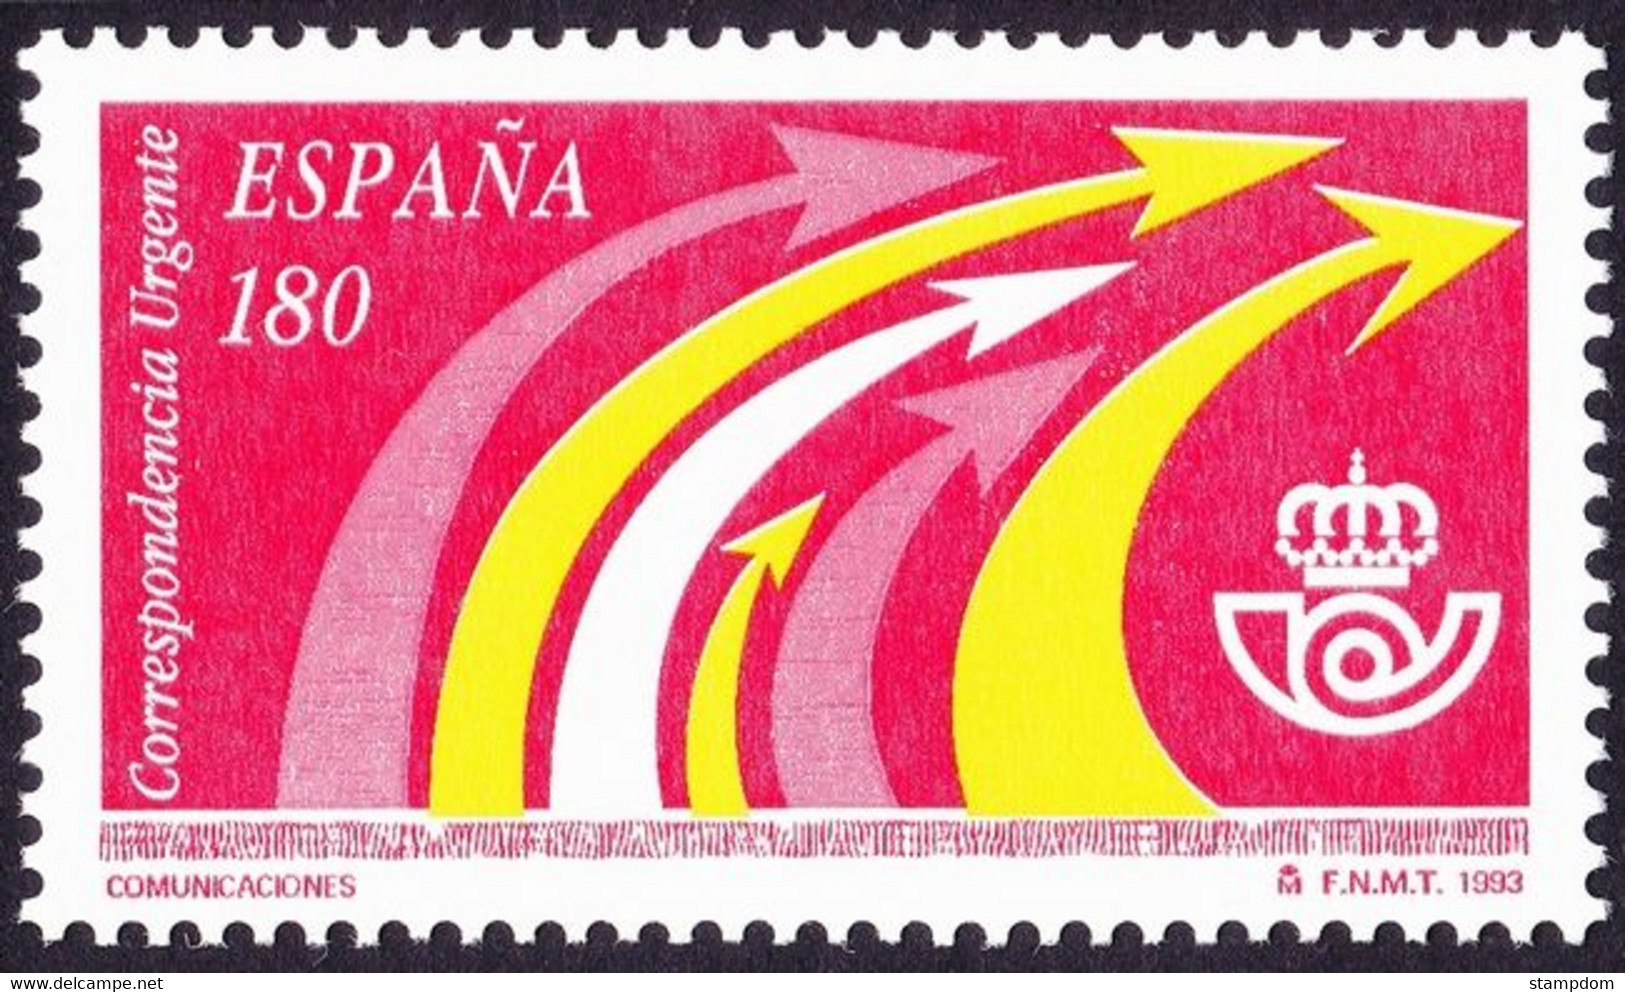 SPAIN 1993 Special Delivery Sc#E28 MNH @S4502 - Special Delivery